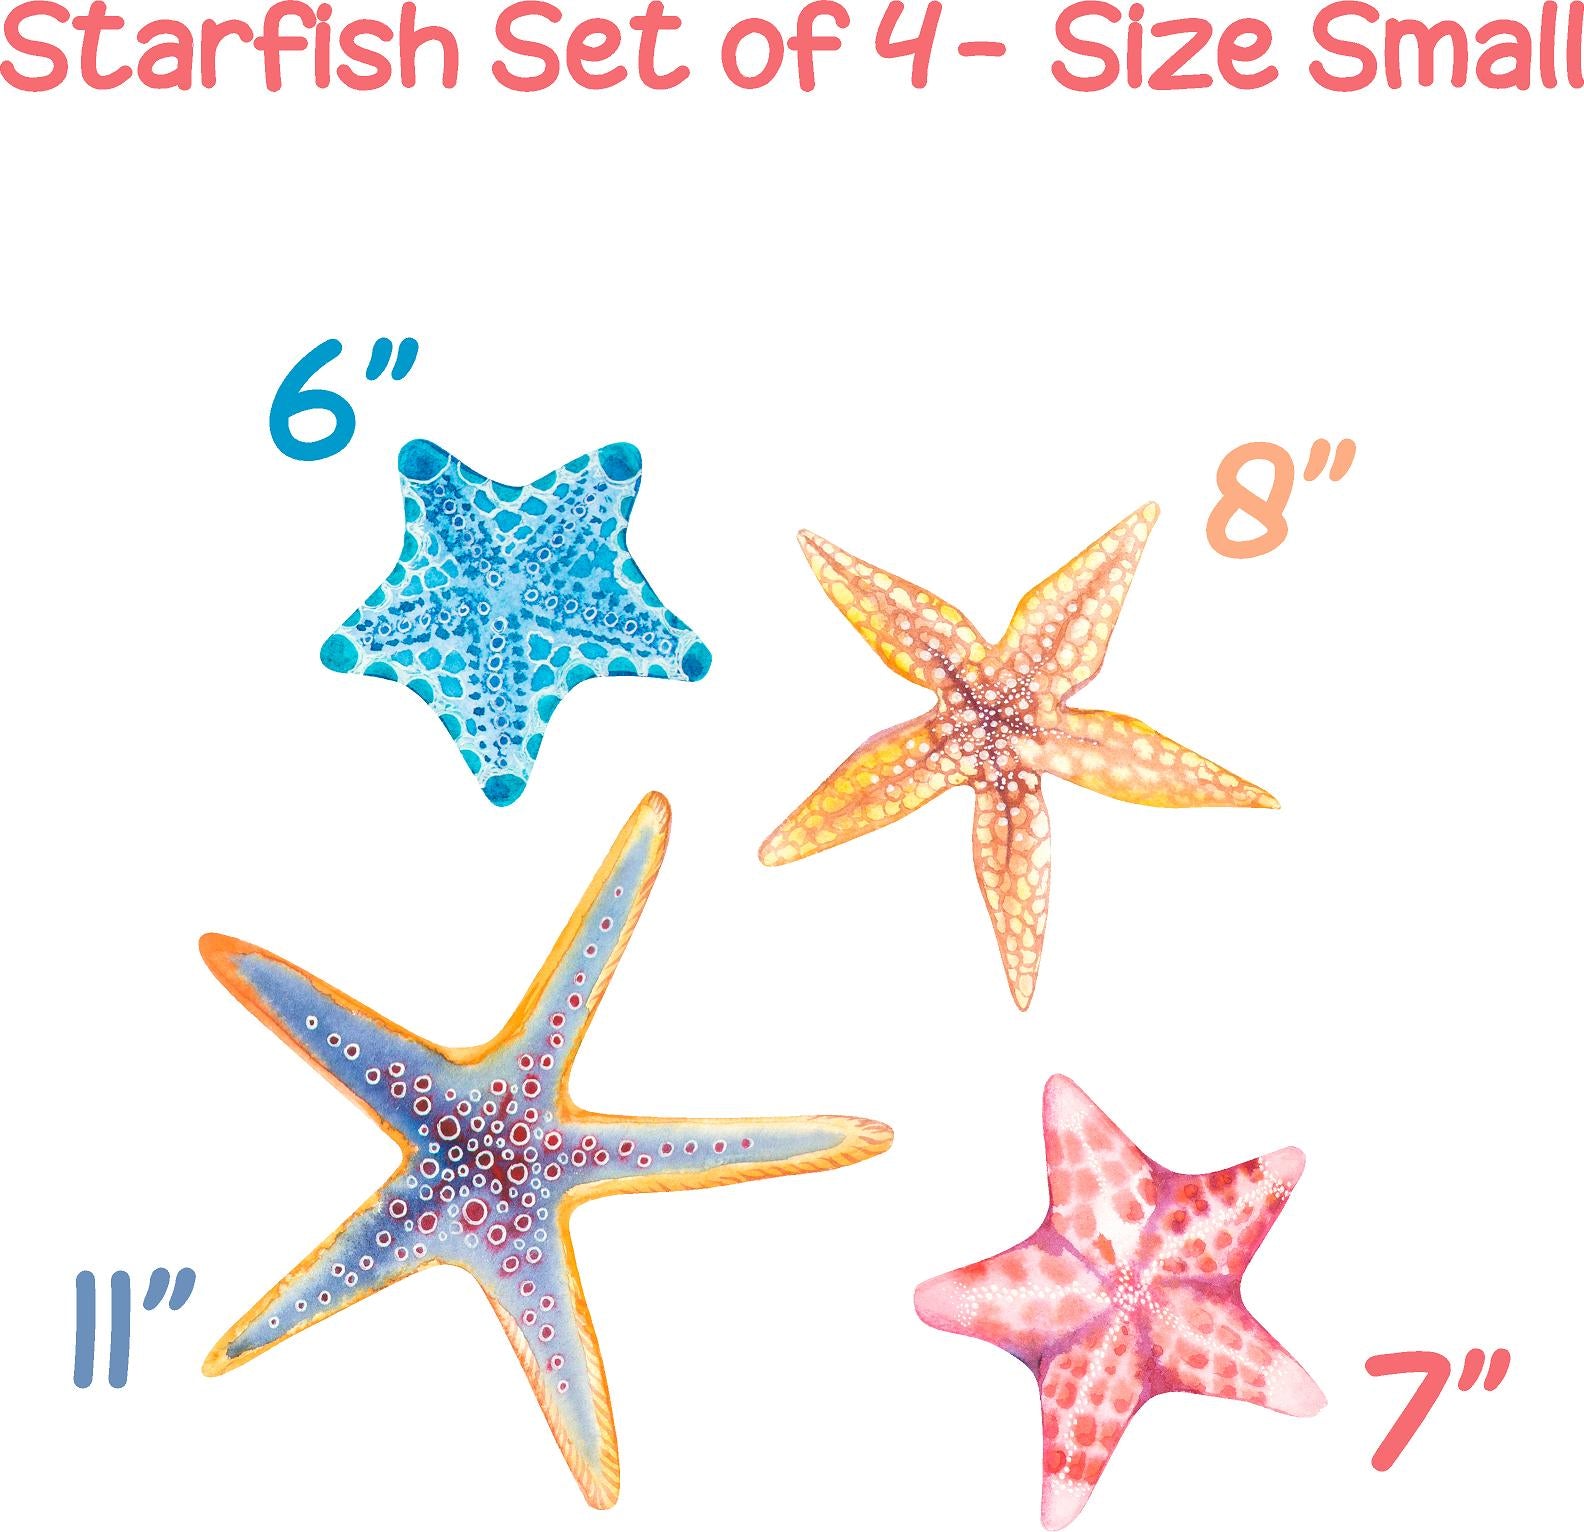 Watercolor Starfish Wall Decal Set of 4 Removable Colorful Sea Star Wall Sticker | DecalBaby